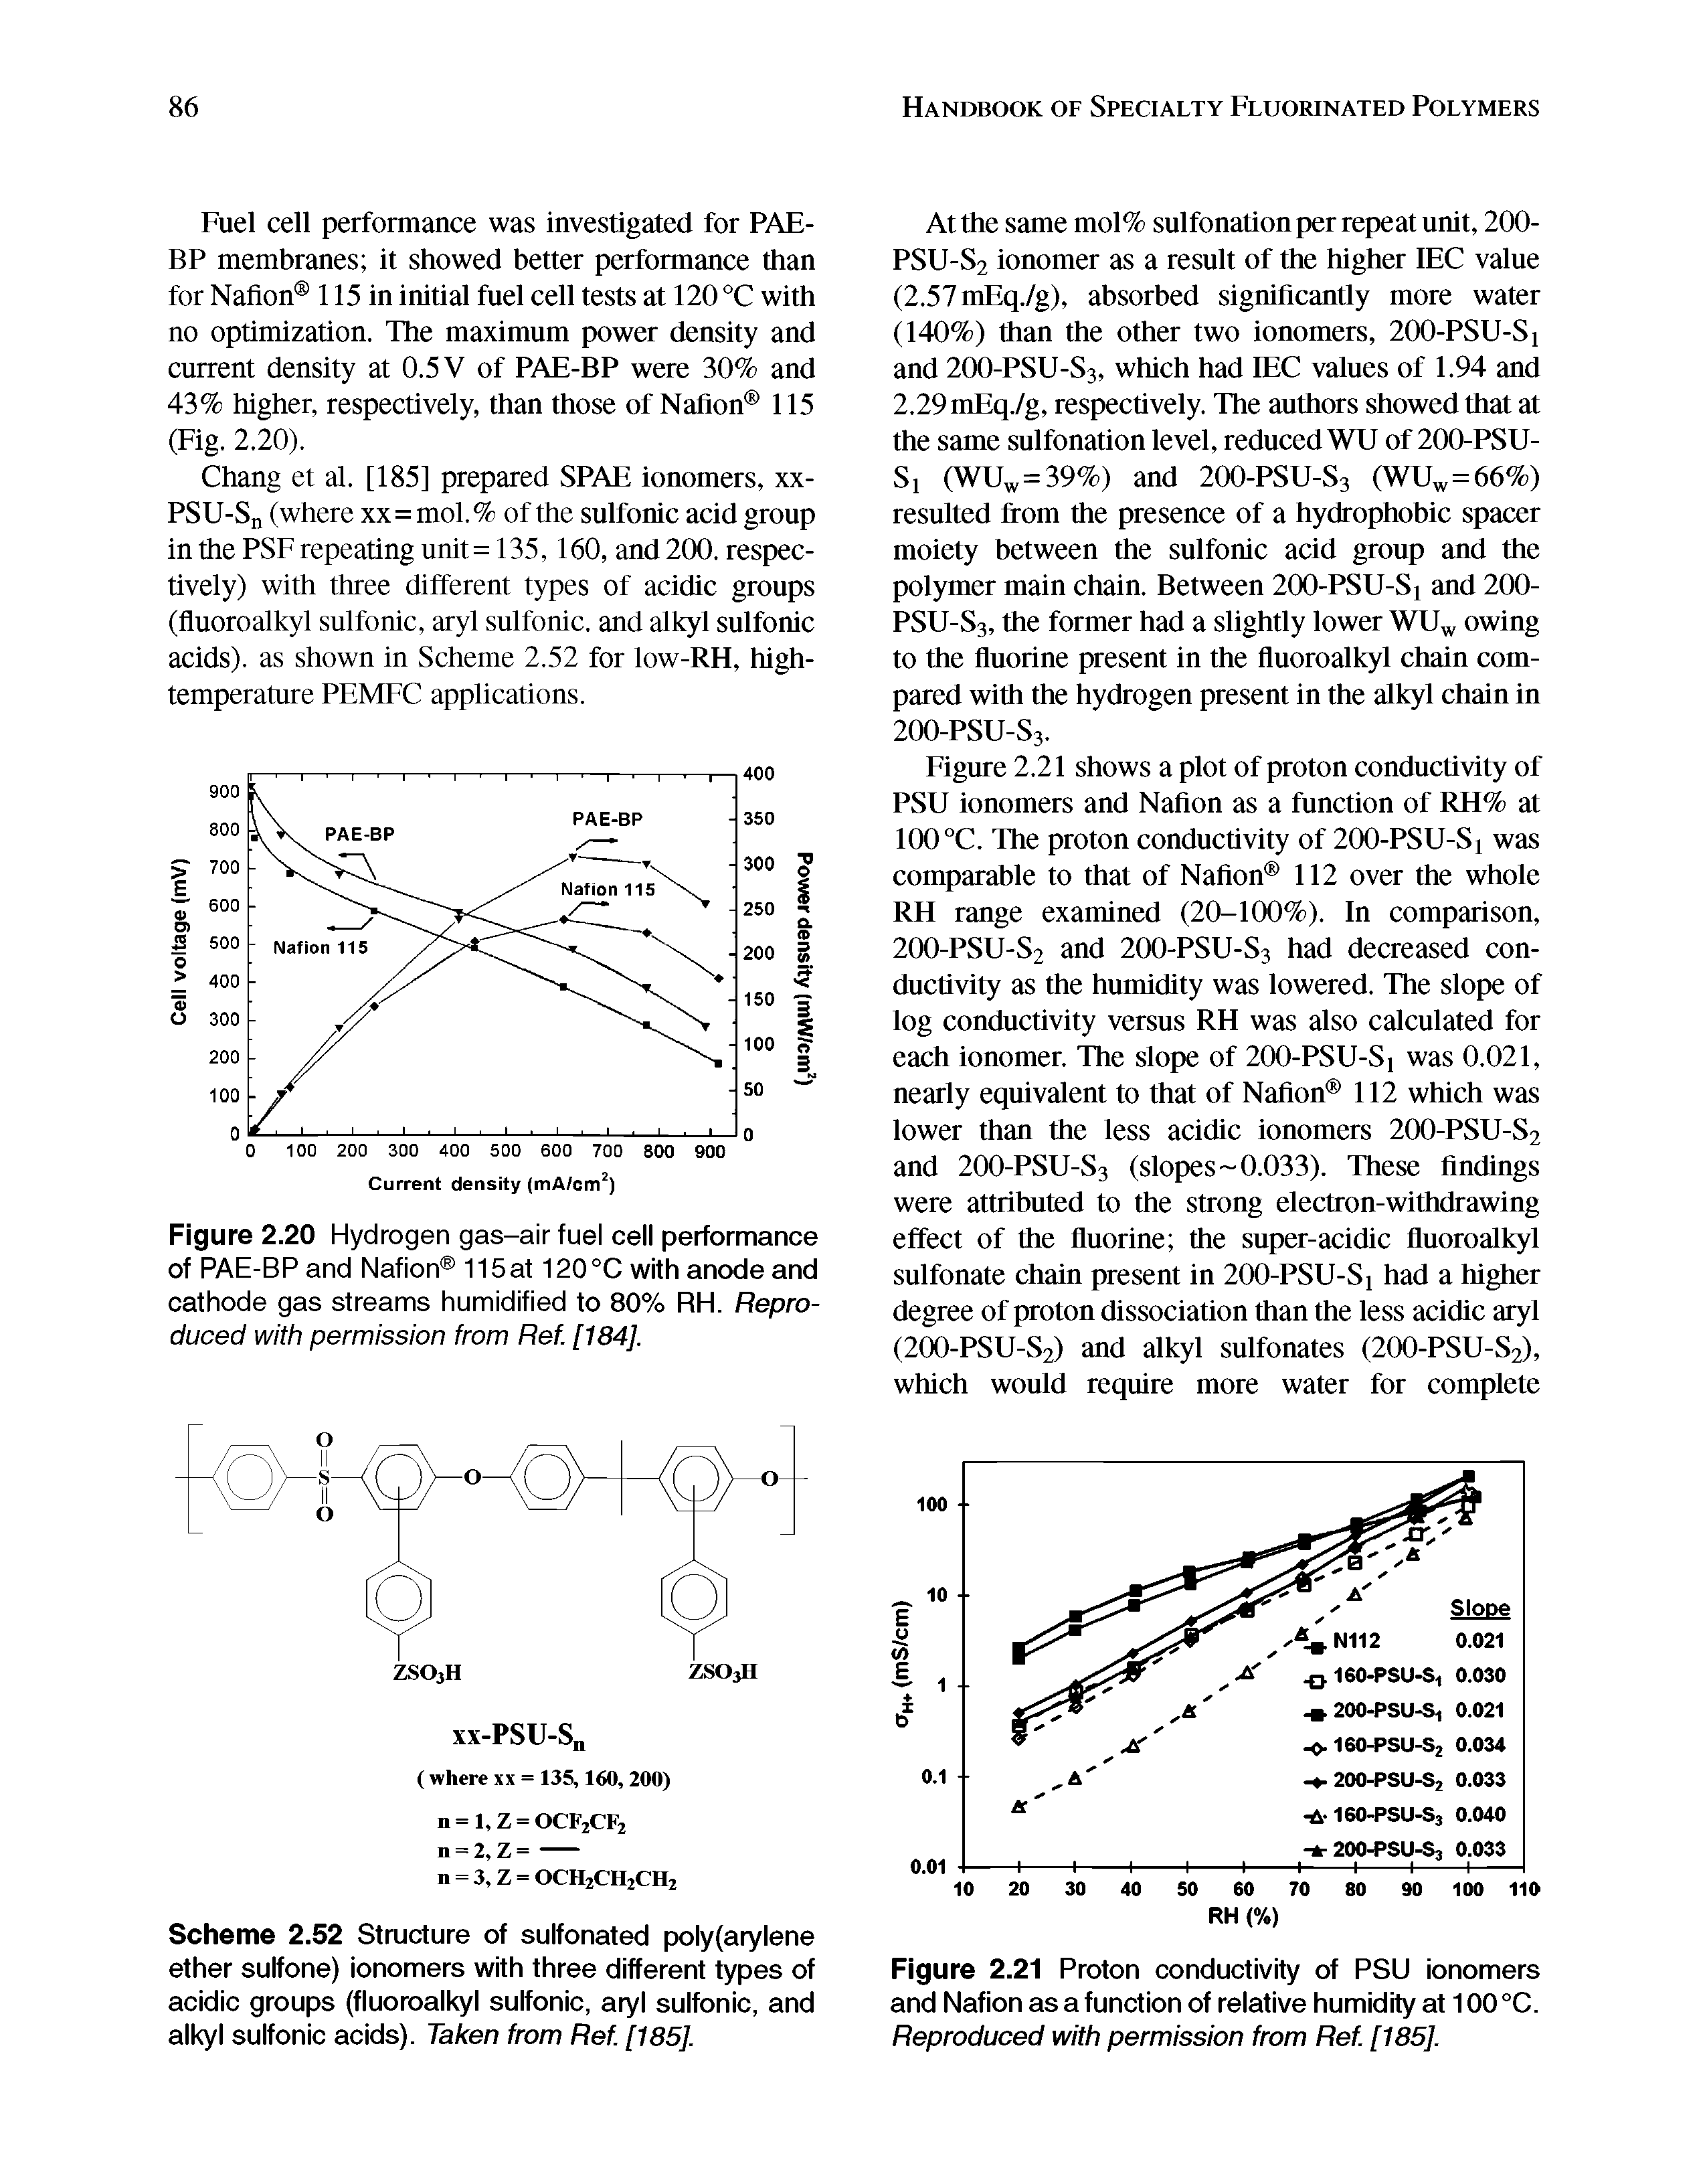 Figure 2.20 Hydrogen gas-air fuel cell performance of PAE-BP and Nafion 115at 120 °C with anode and cathode gas streams humidified to 80% RH. Reproduced with permission from Ref. [184],...